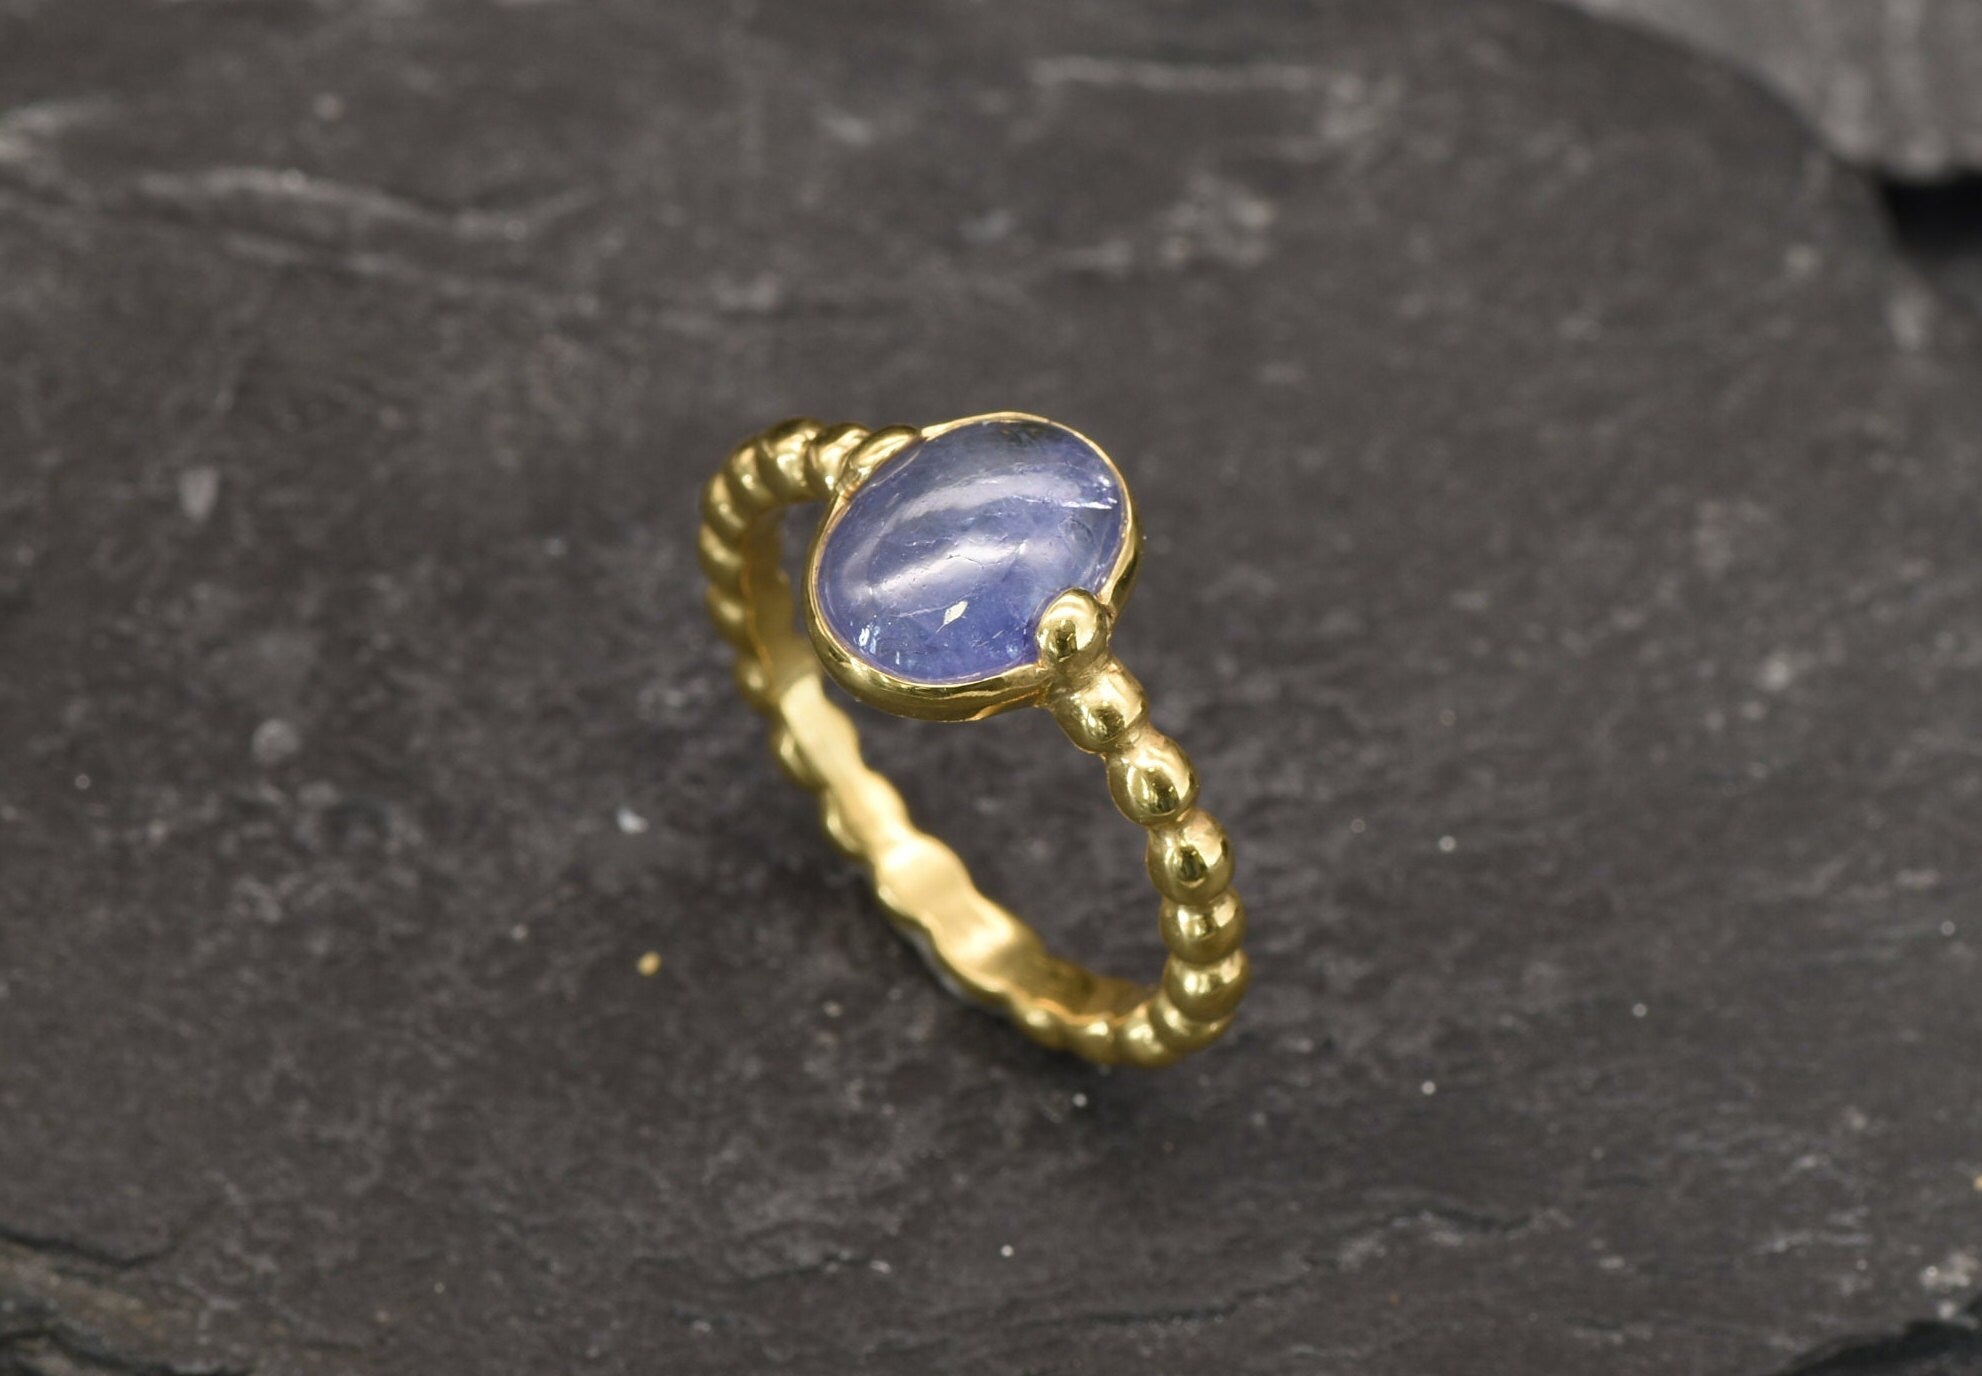 Gold Tanzanite Ring, Natural Tanzanite, Blue Oval Ring, December Birthstone, Gold Solitaire Ring, Purple Ring, Vintage Ring, Gold Vermeil